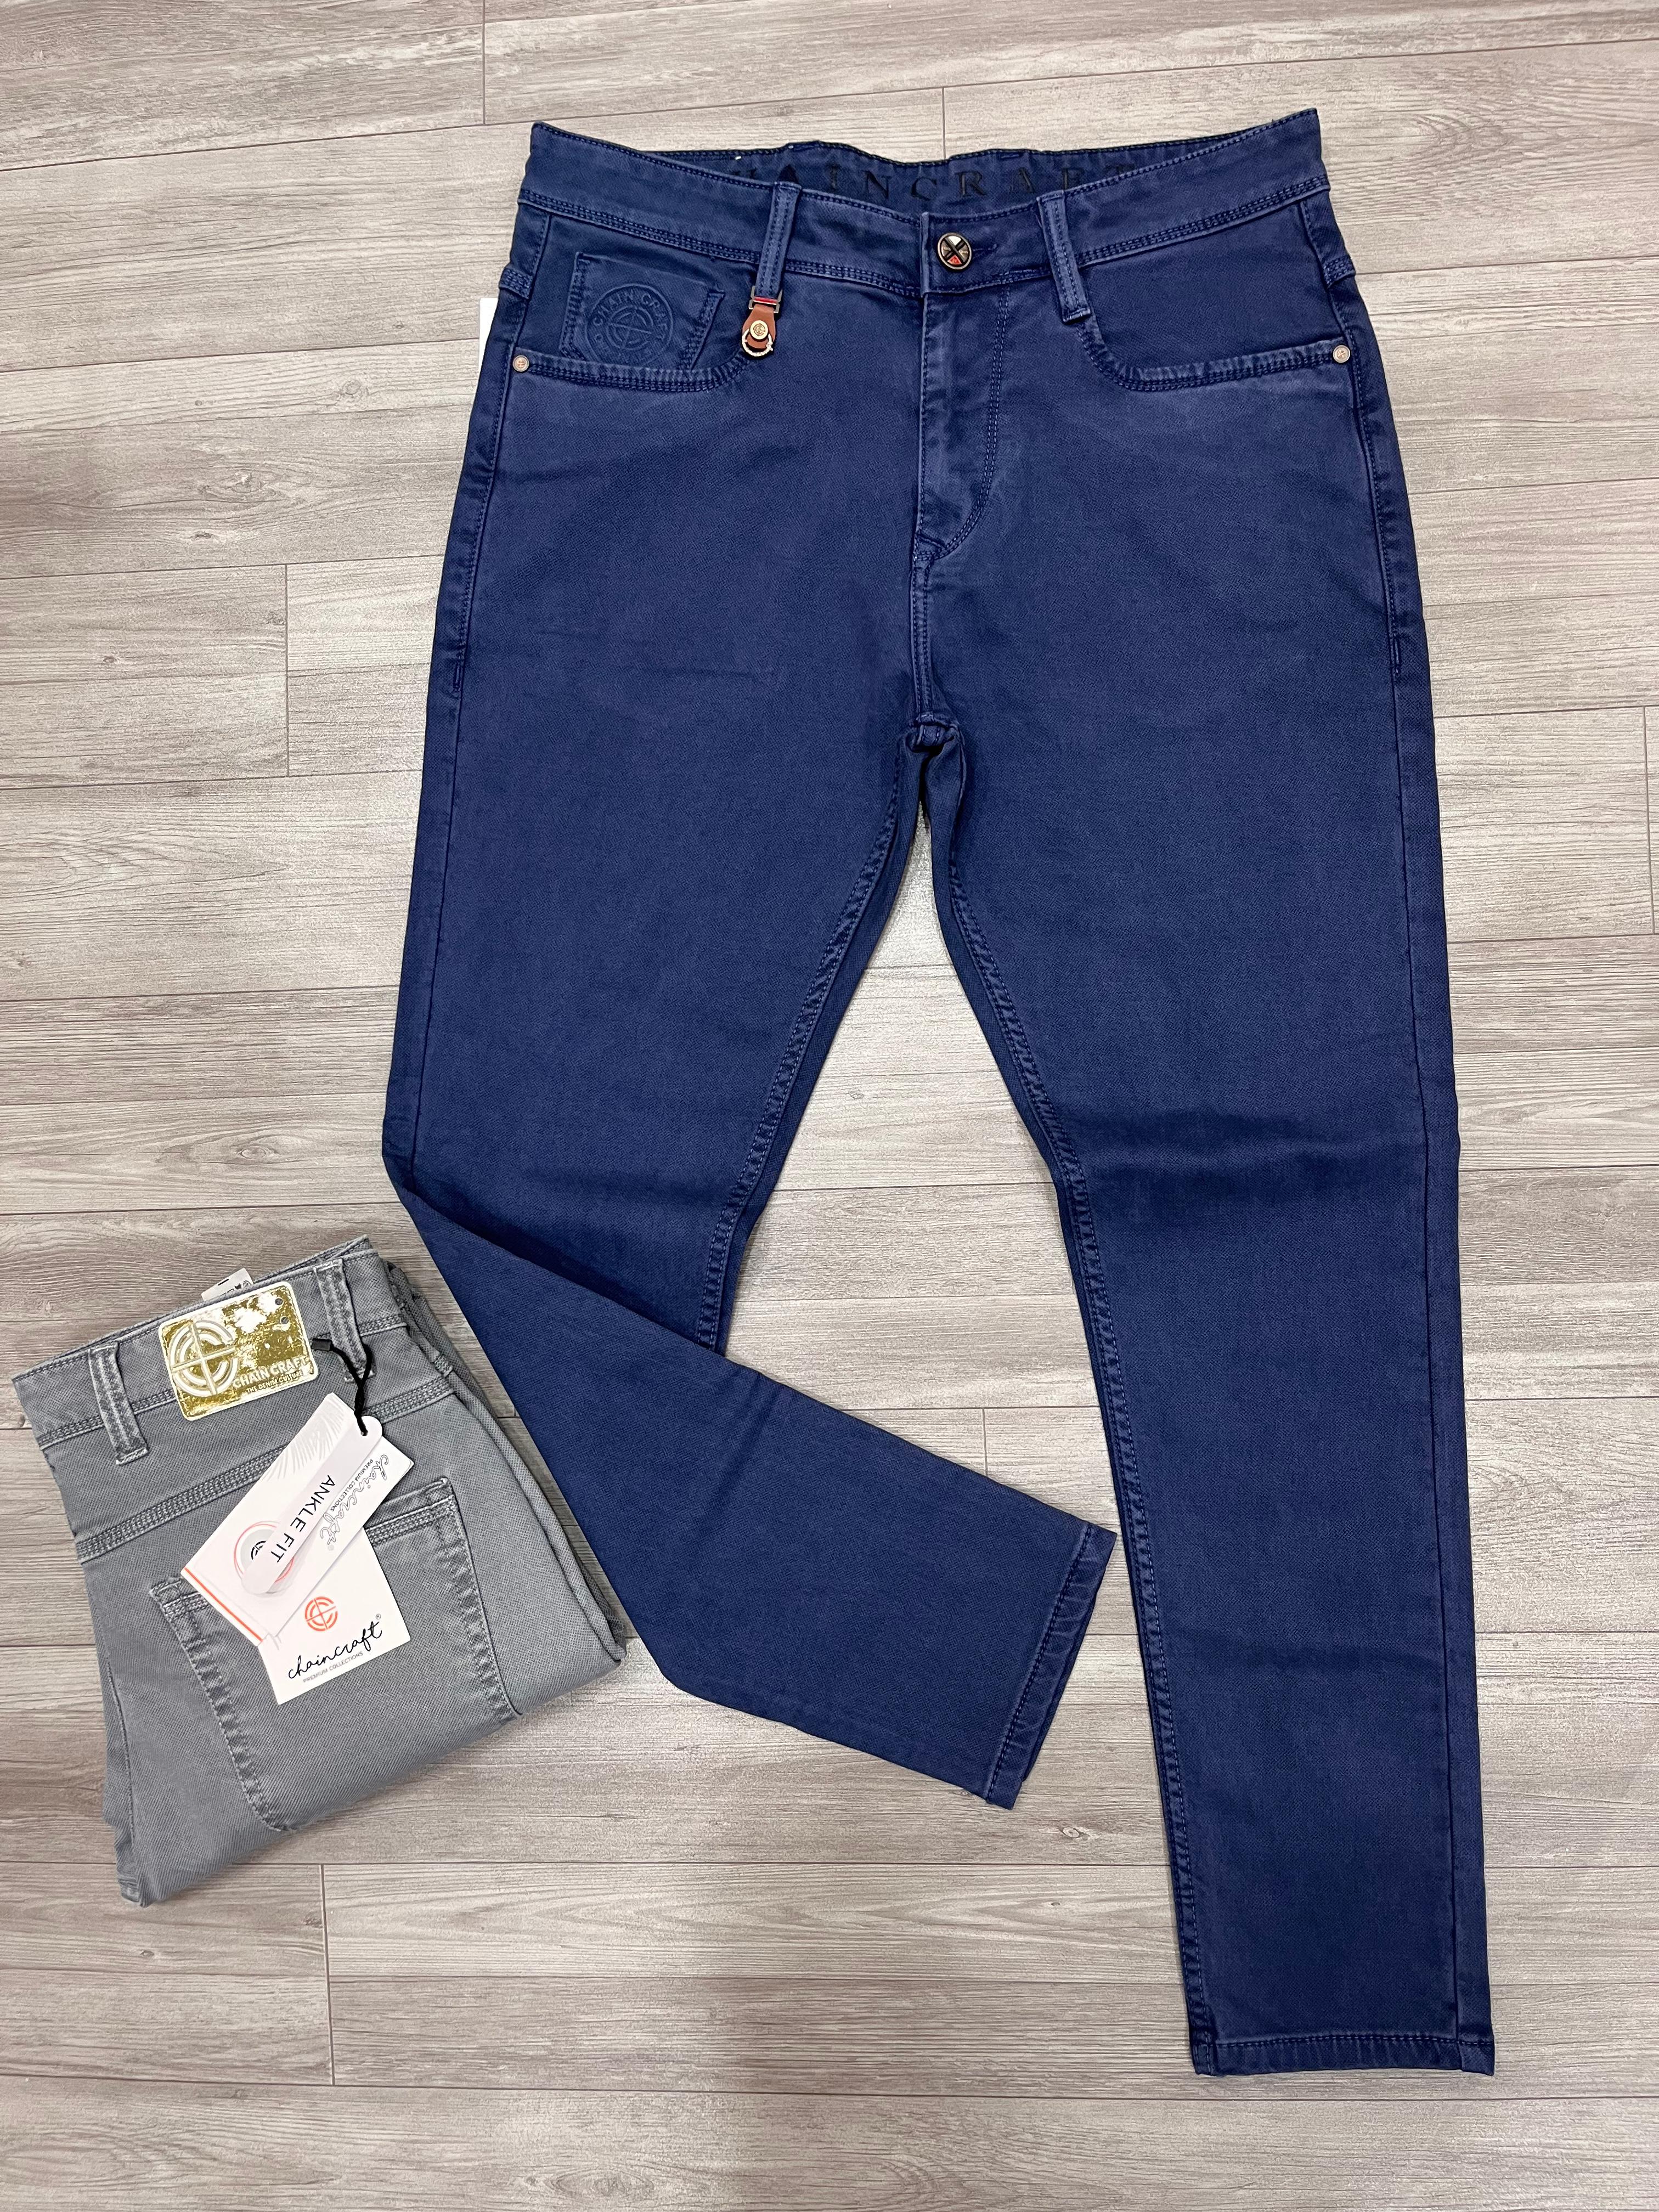 Chain Craft RFD Colour Jeans